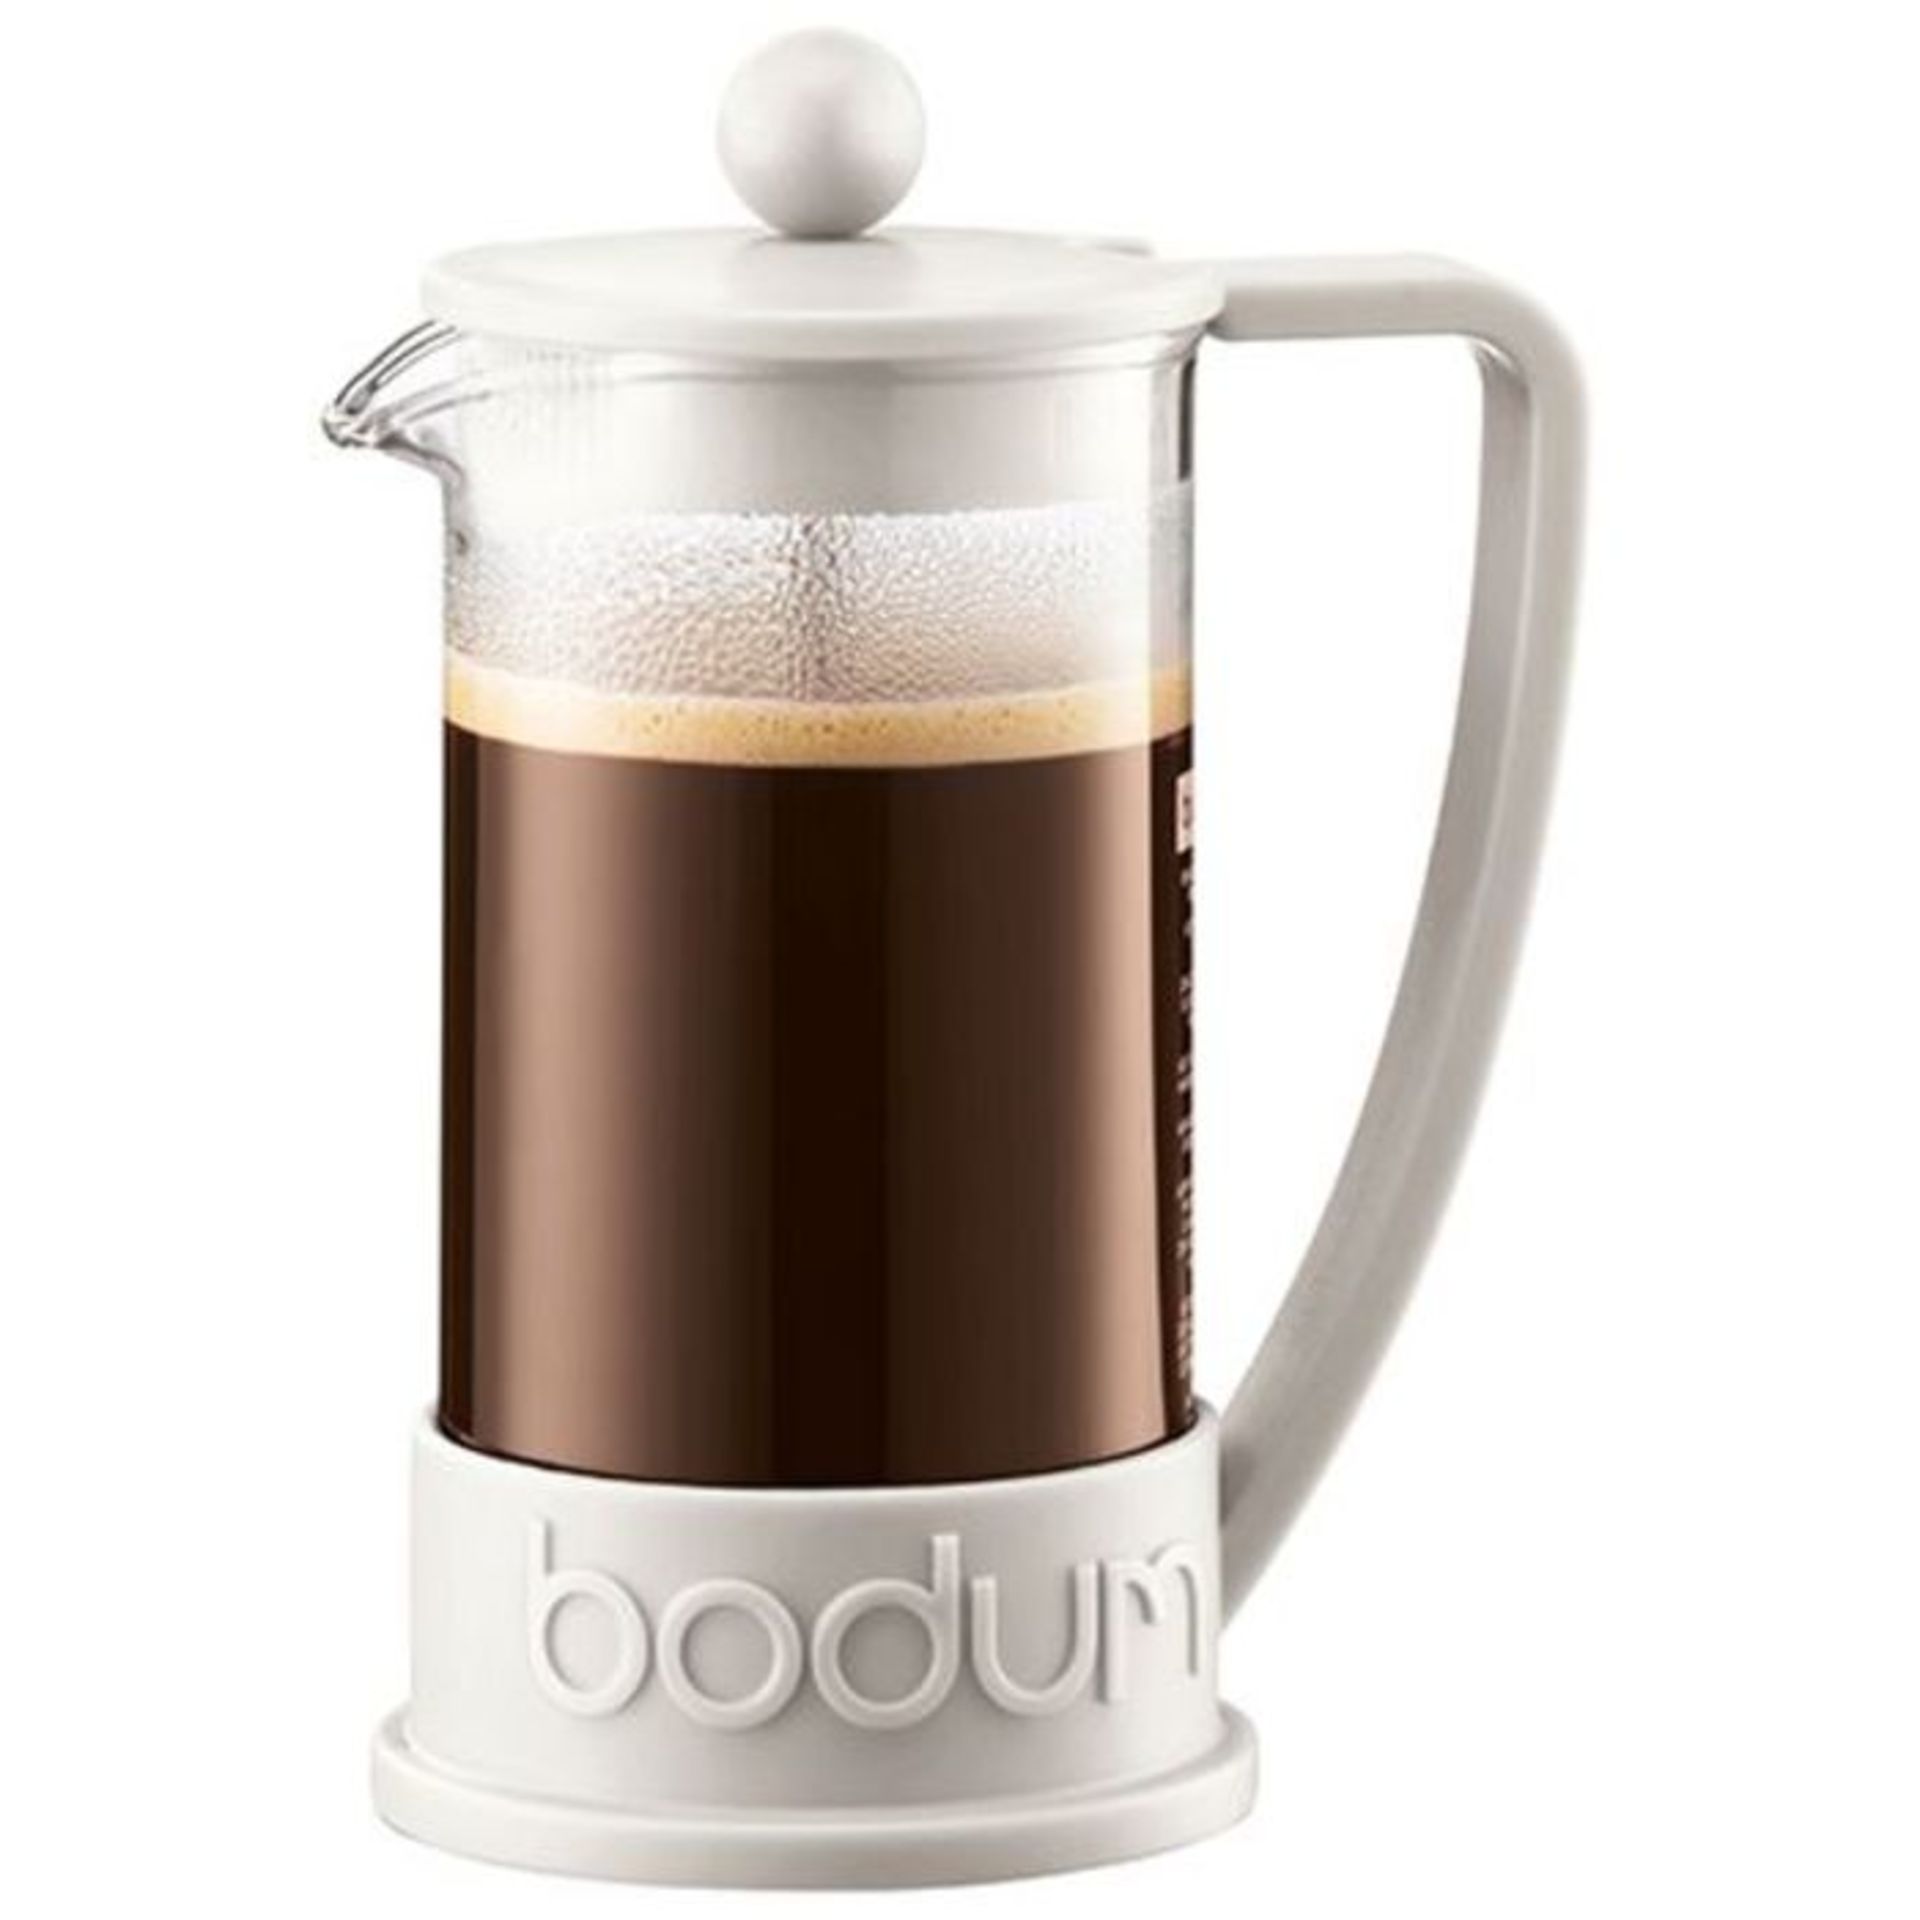 BODUM Brazil 8 Cup French Press Coffee Maker, Off - Image 2 of 2